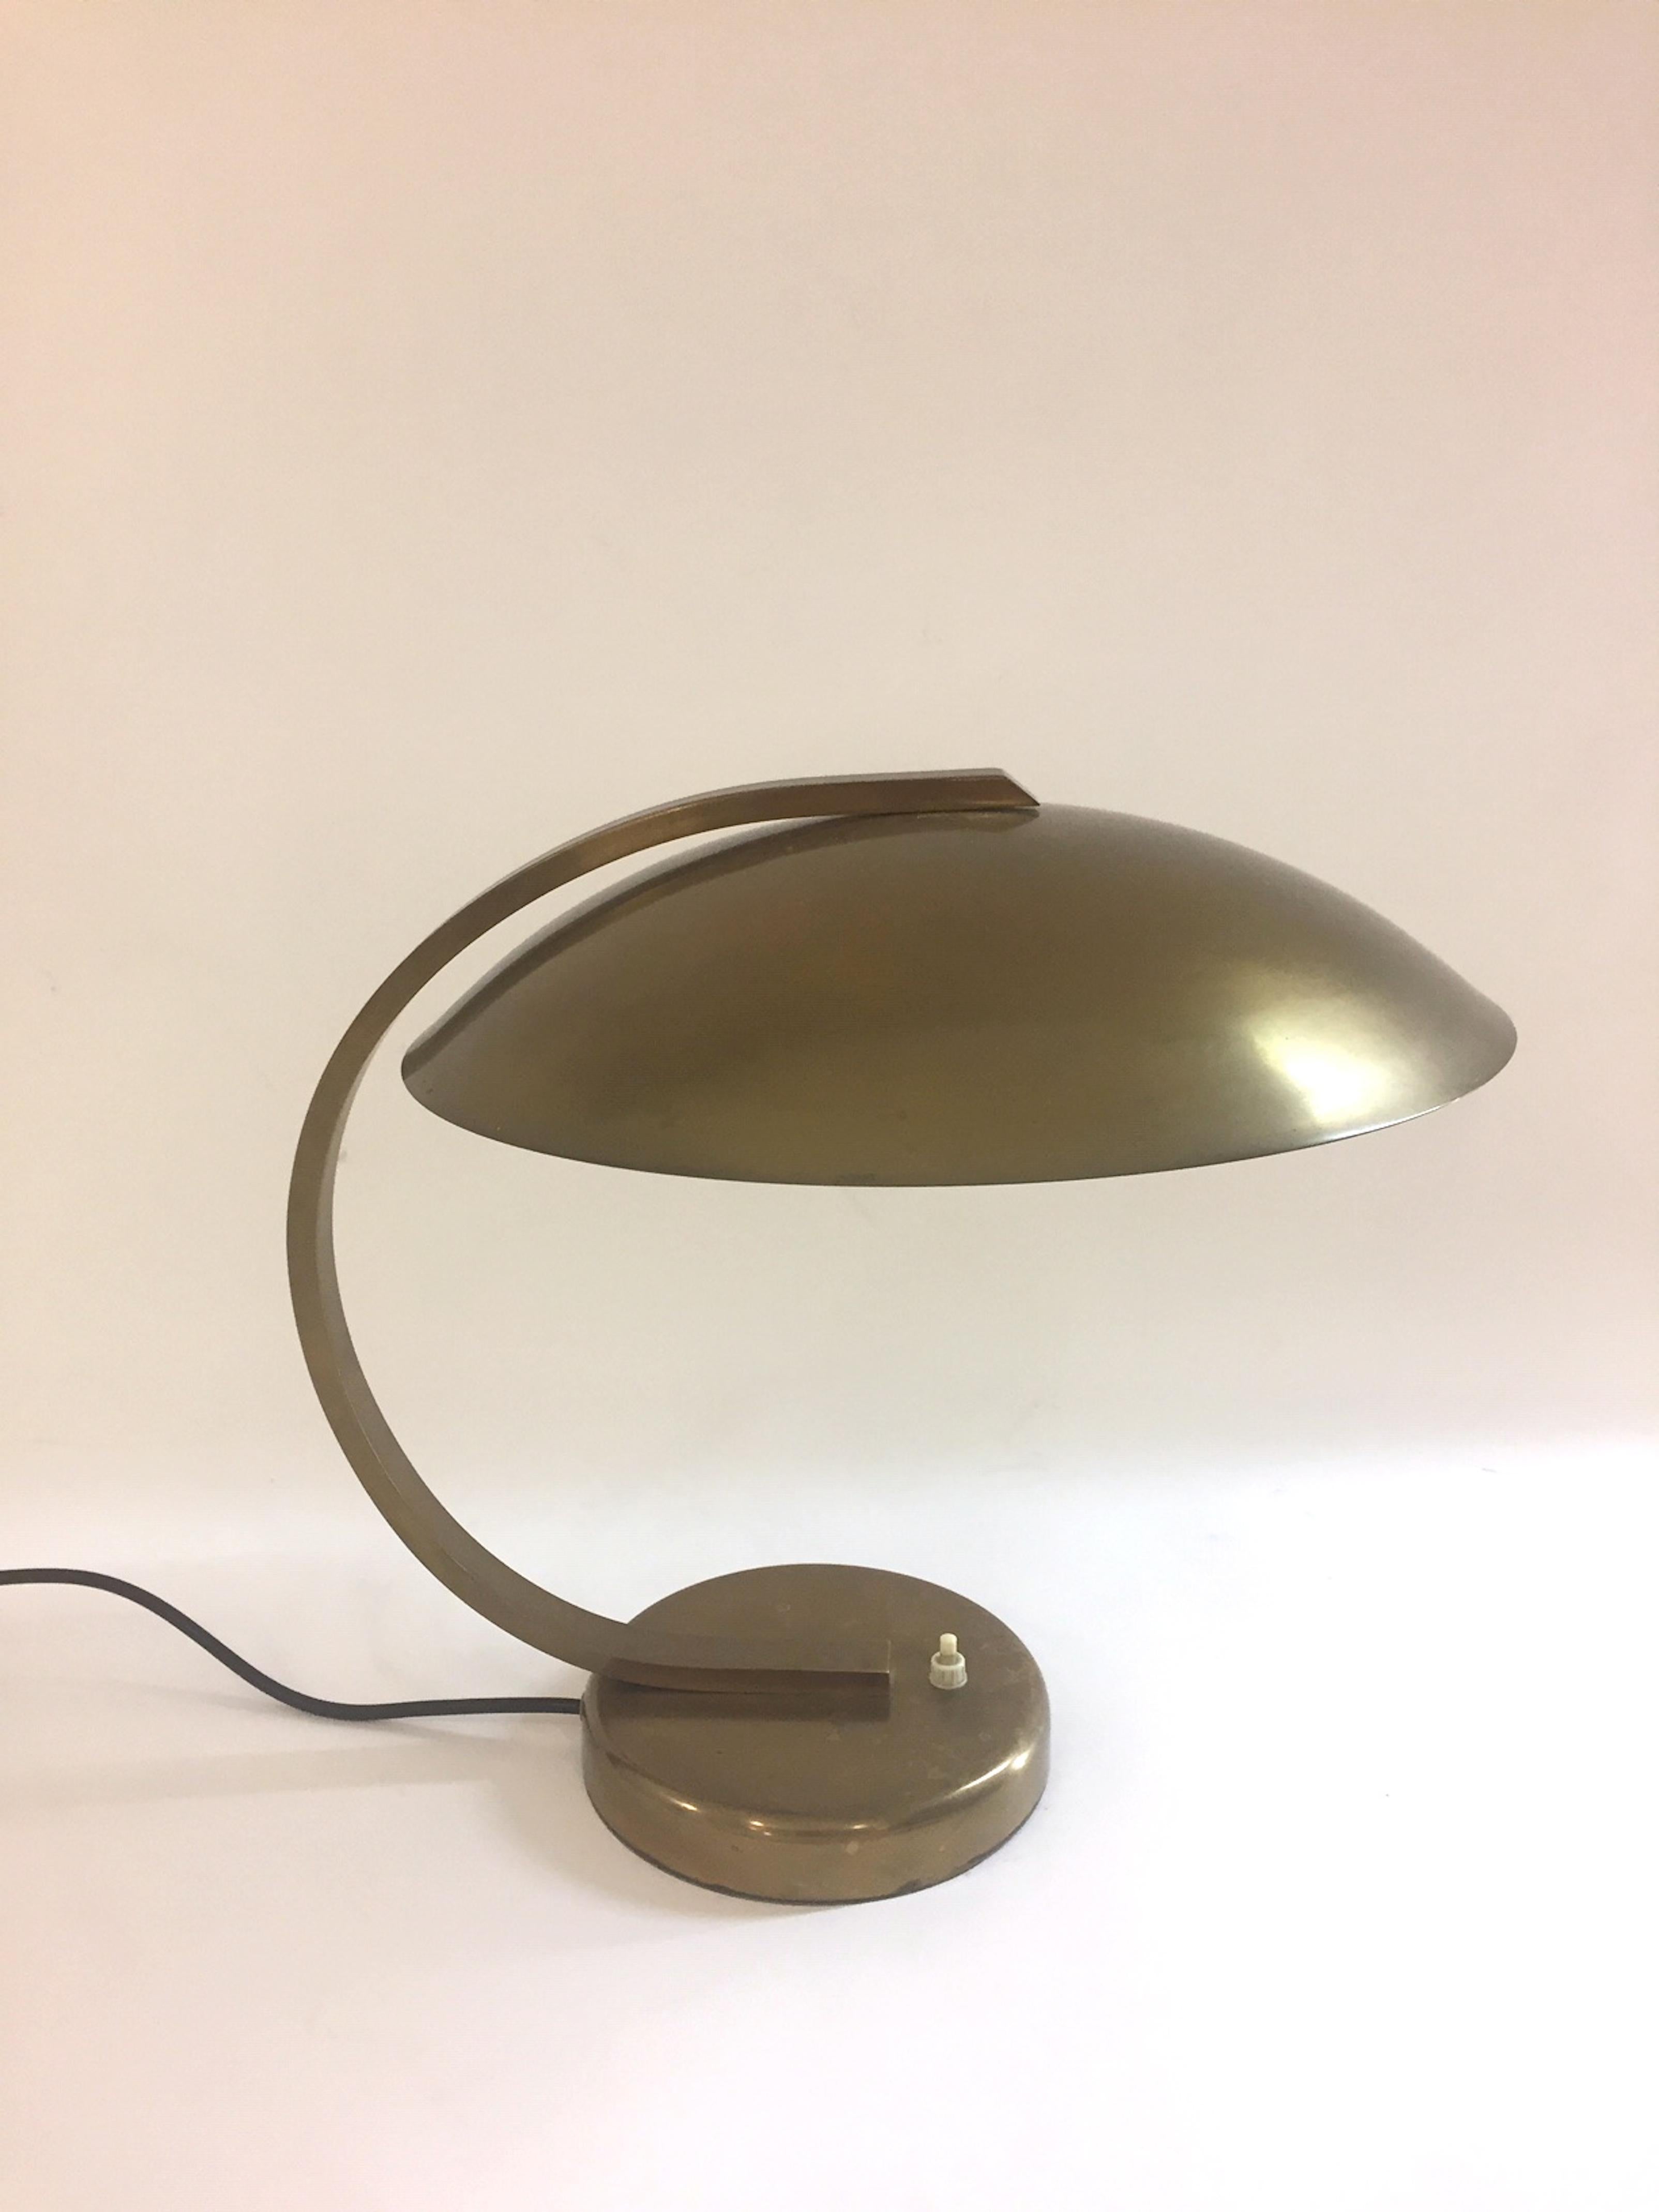 A German Bauhaus style table lamp. Brass frame. Good vintage condition.